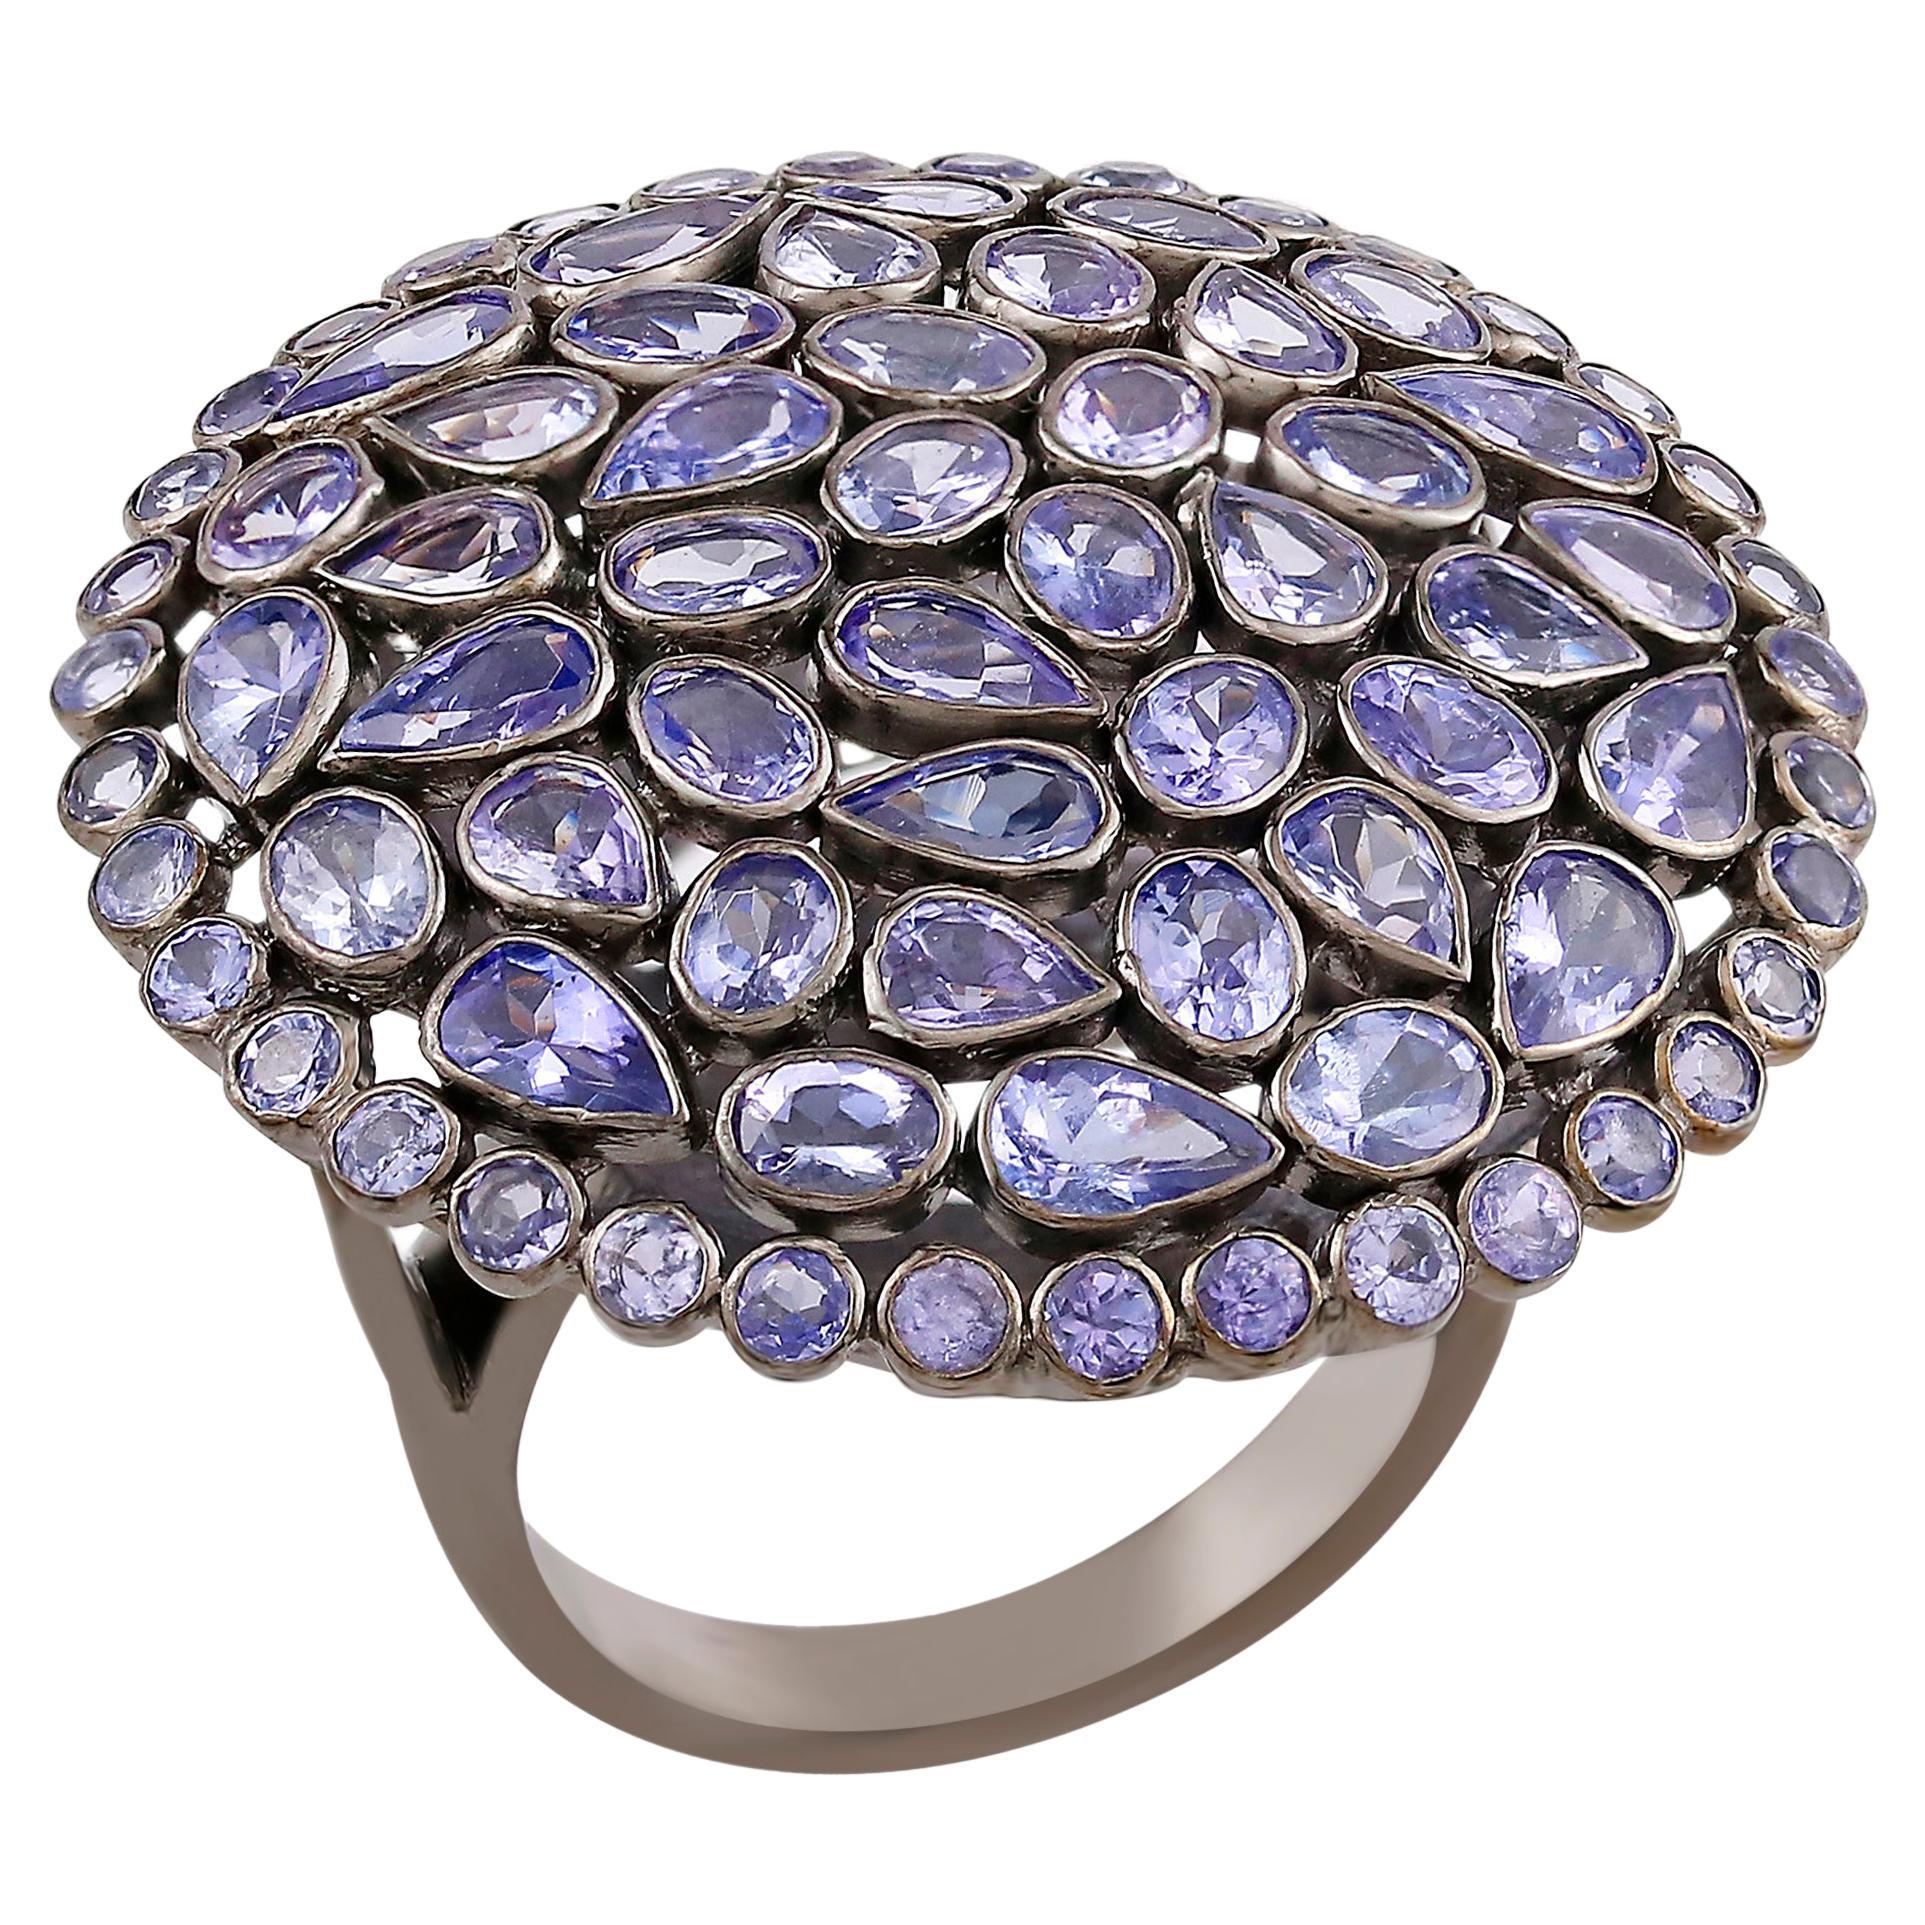 Gemistry Victorian 8.9cttw Tanzanite Cluster Ring in 925 Sterling Silver For Sale